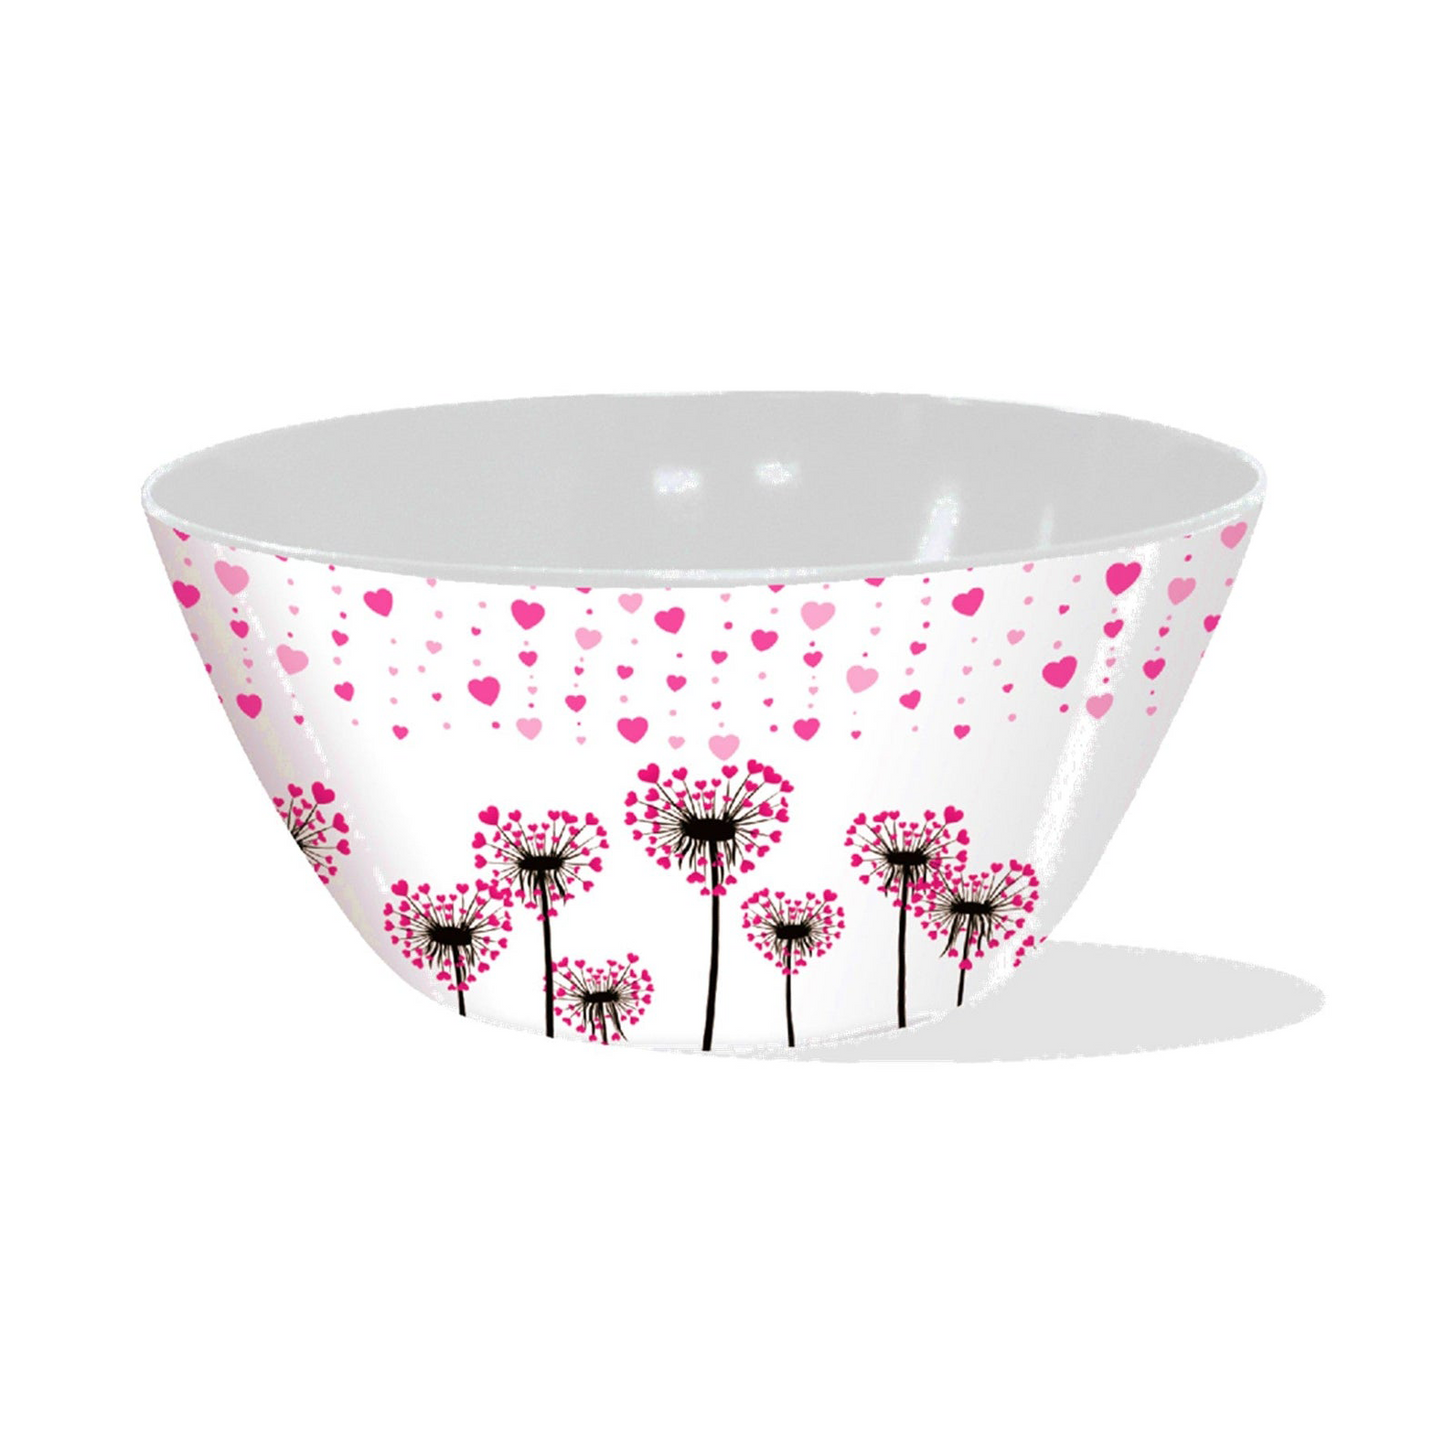 3.5qt Melamine Serving Bowl - Love Is In The Air